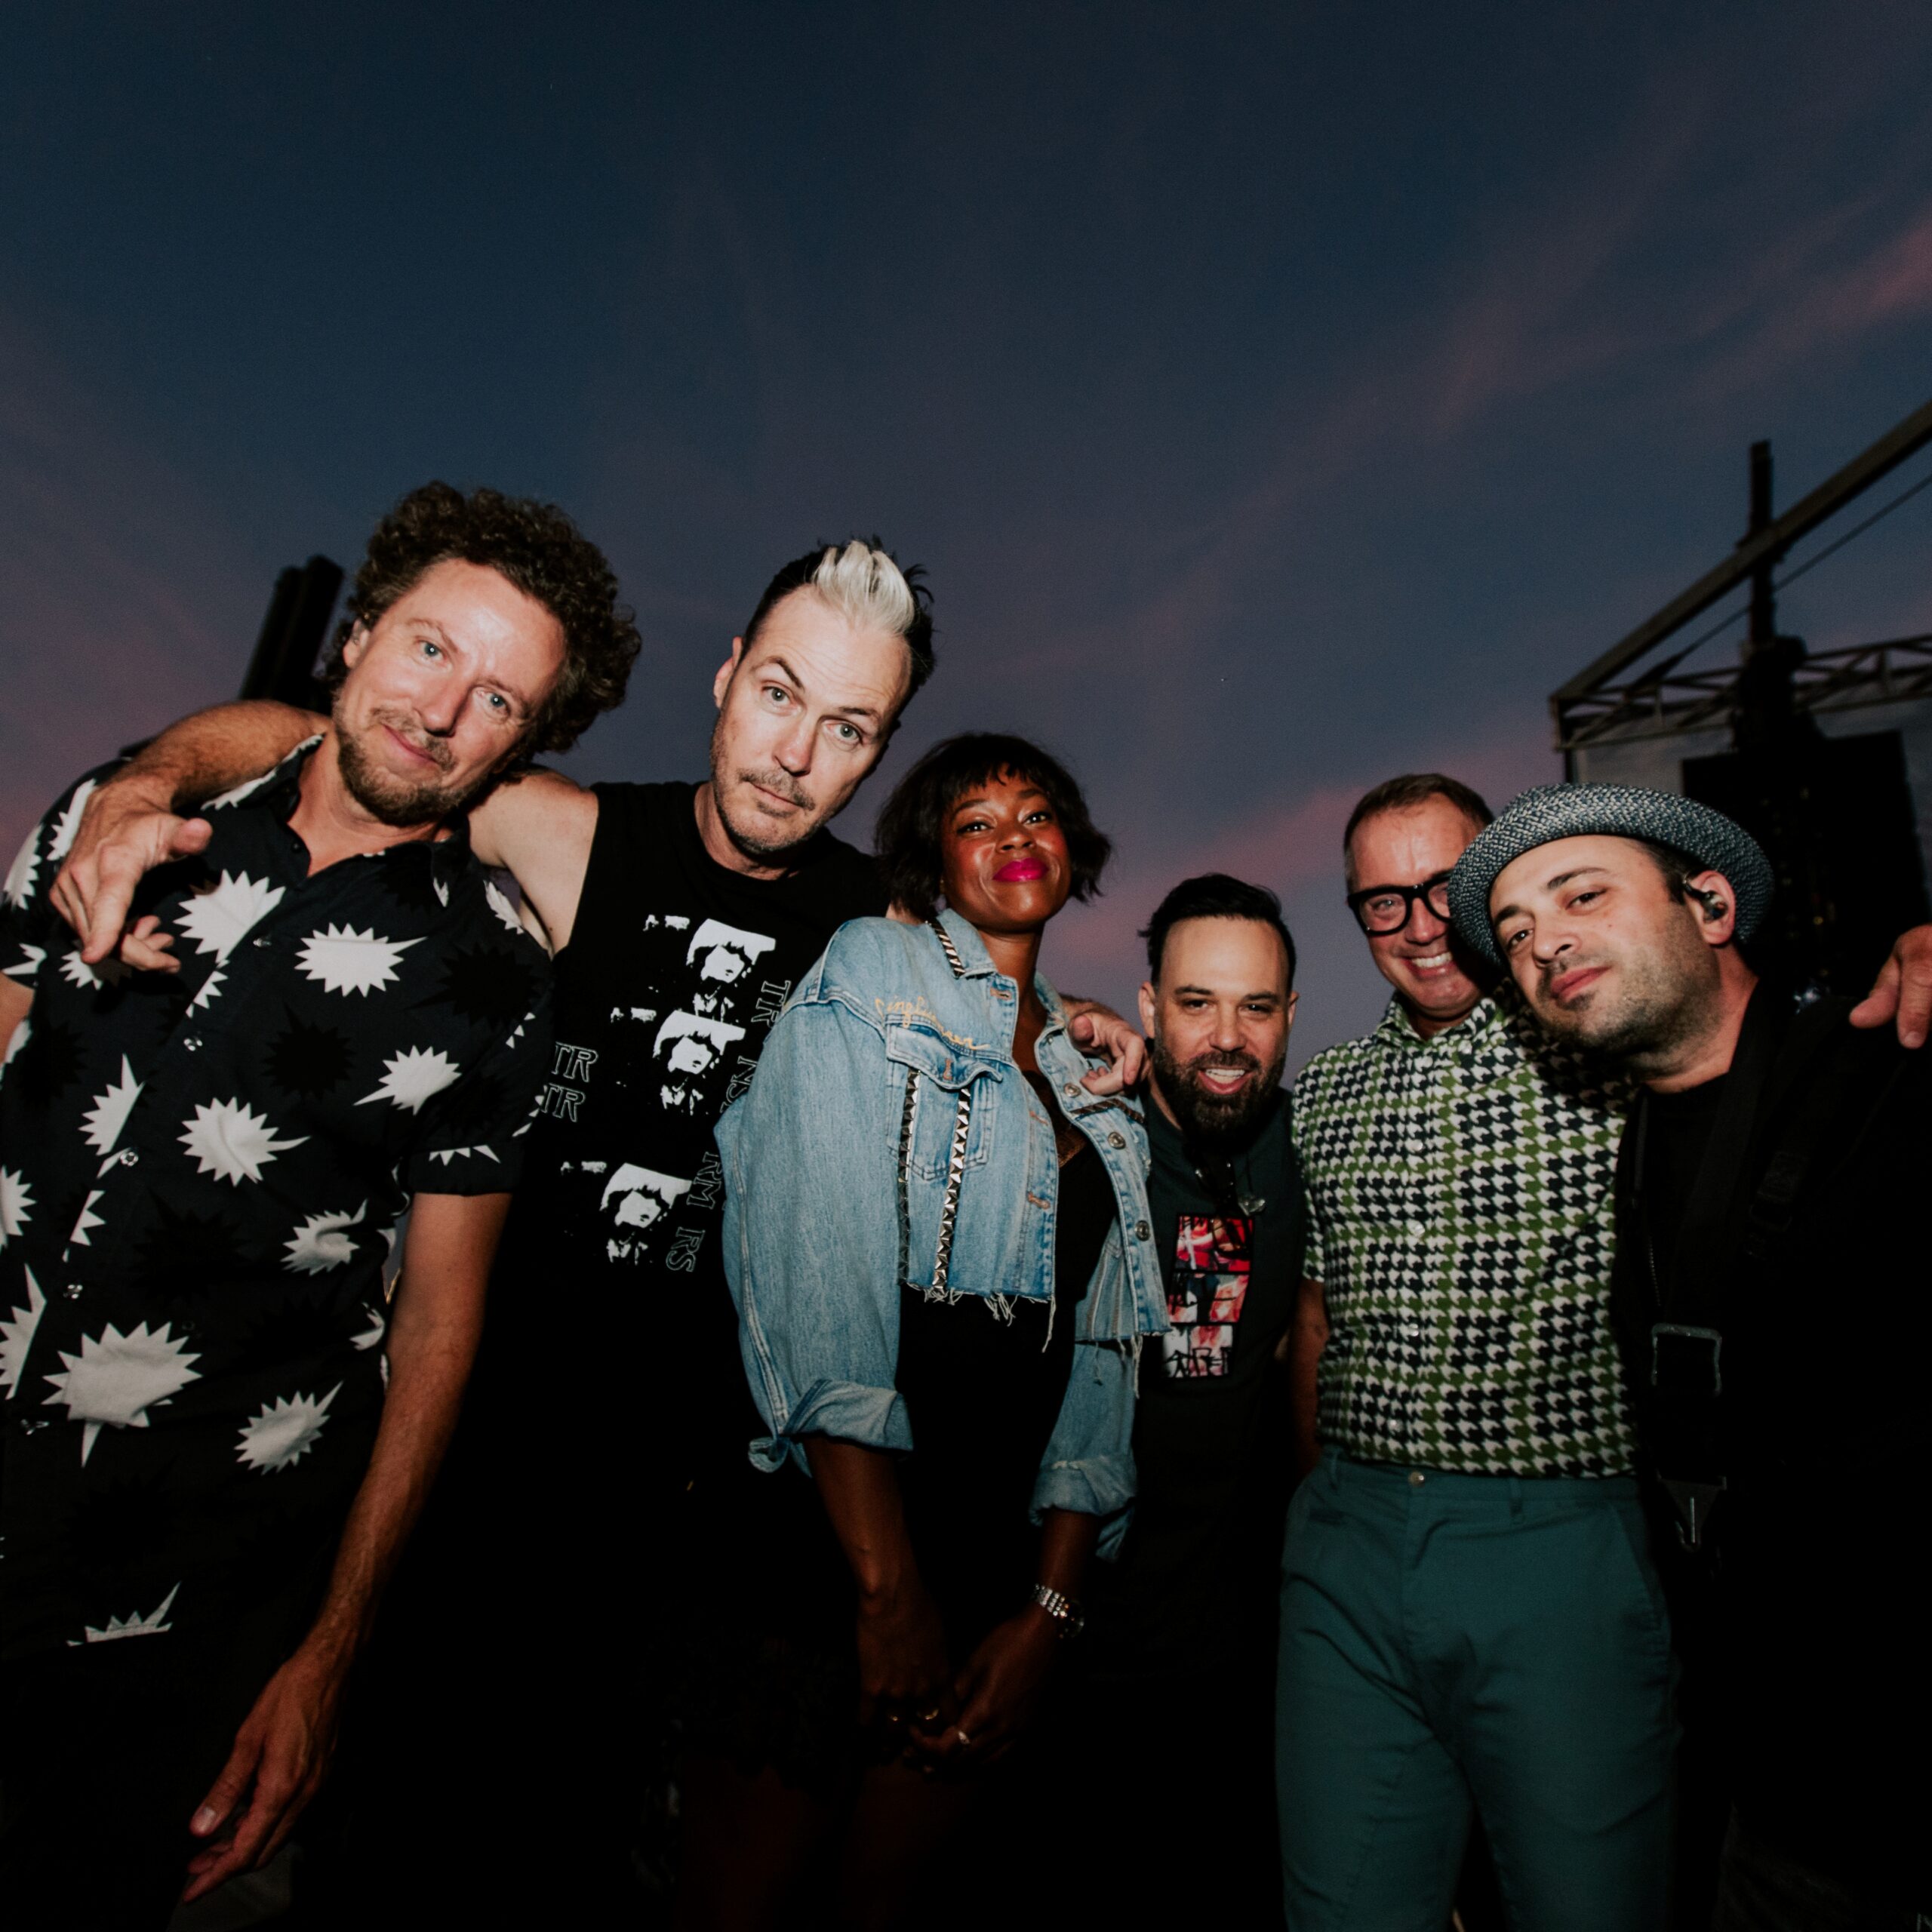 Fitz and The Tantrums via Anna Lee Media for use by 360 Magazine